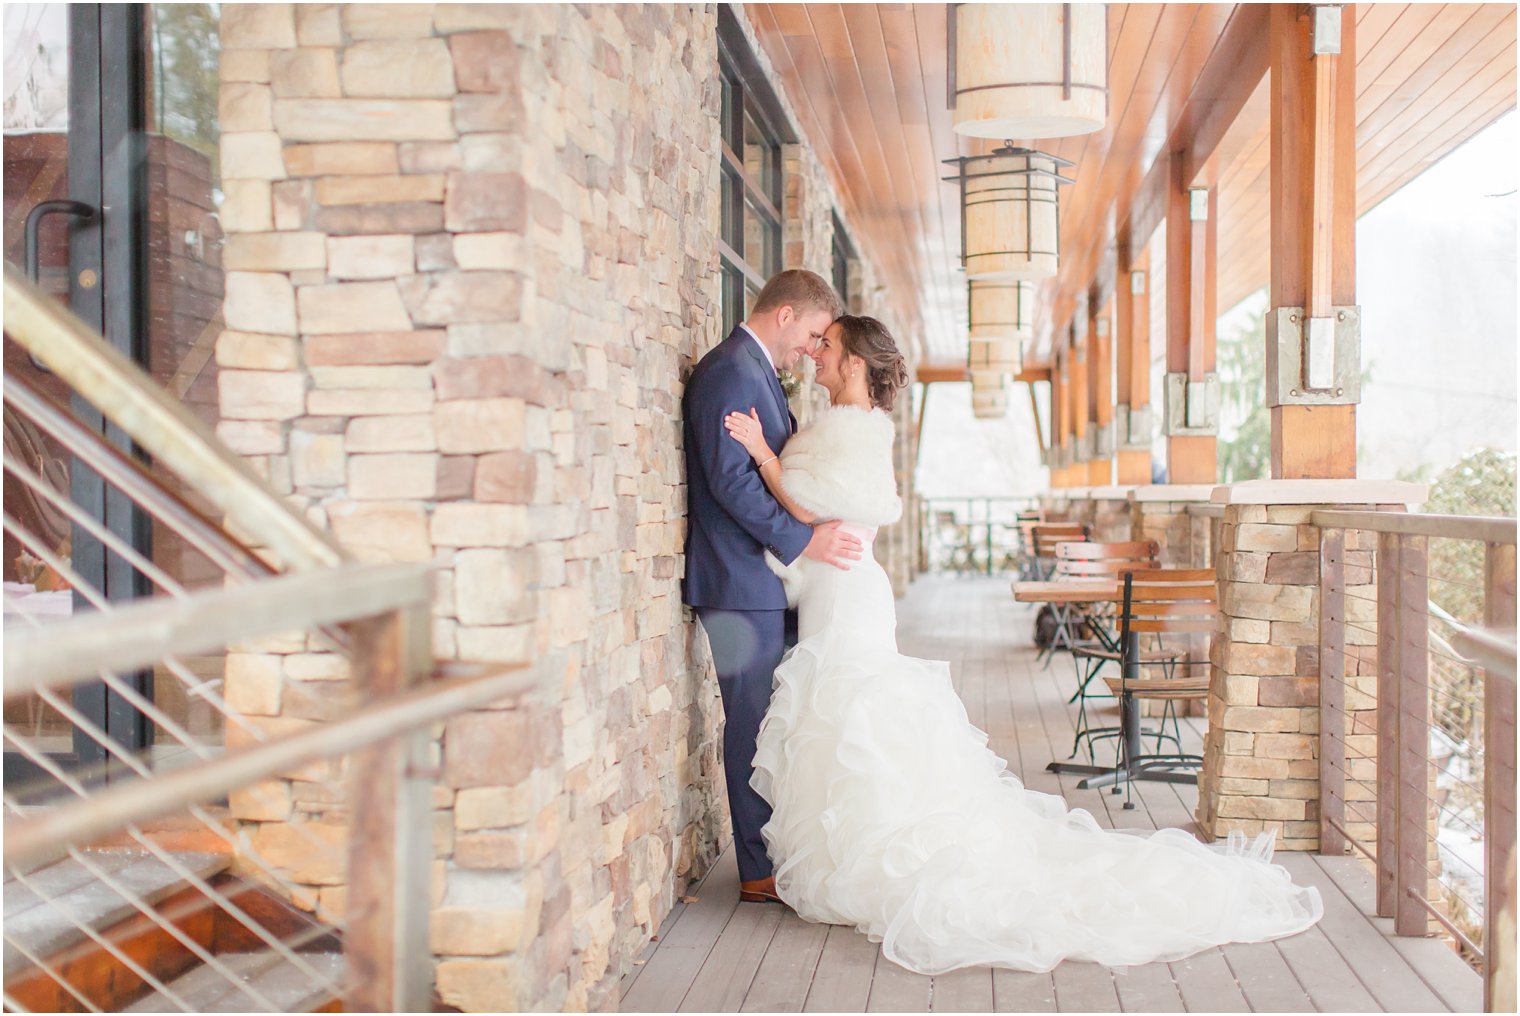 Winter wedding photo of bride and groom | Stone House at Stirling Ridge in Warren, NJ